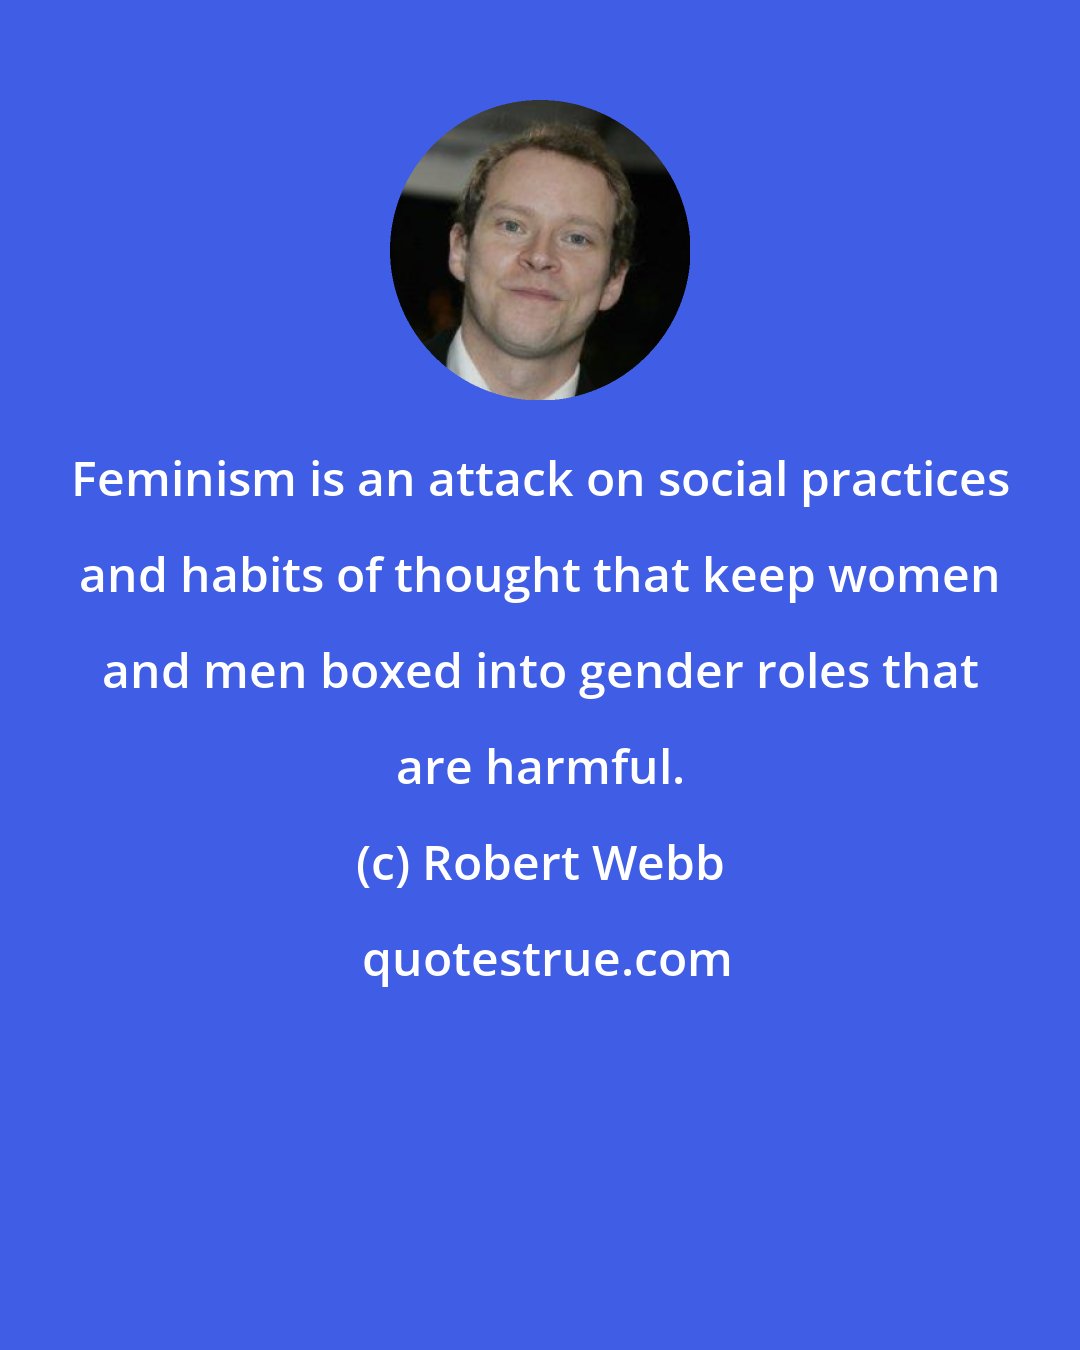 Robert Webb: Feminism is an attack on social practices and habits of thought that keep women and men boxed into gender roles that are harmful.